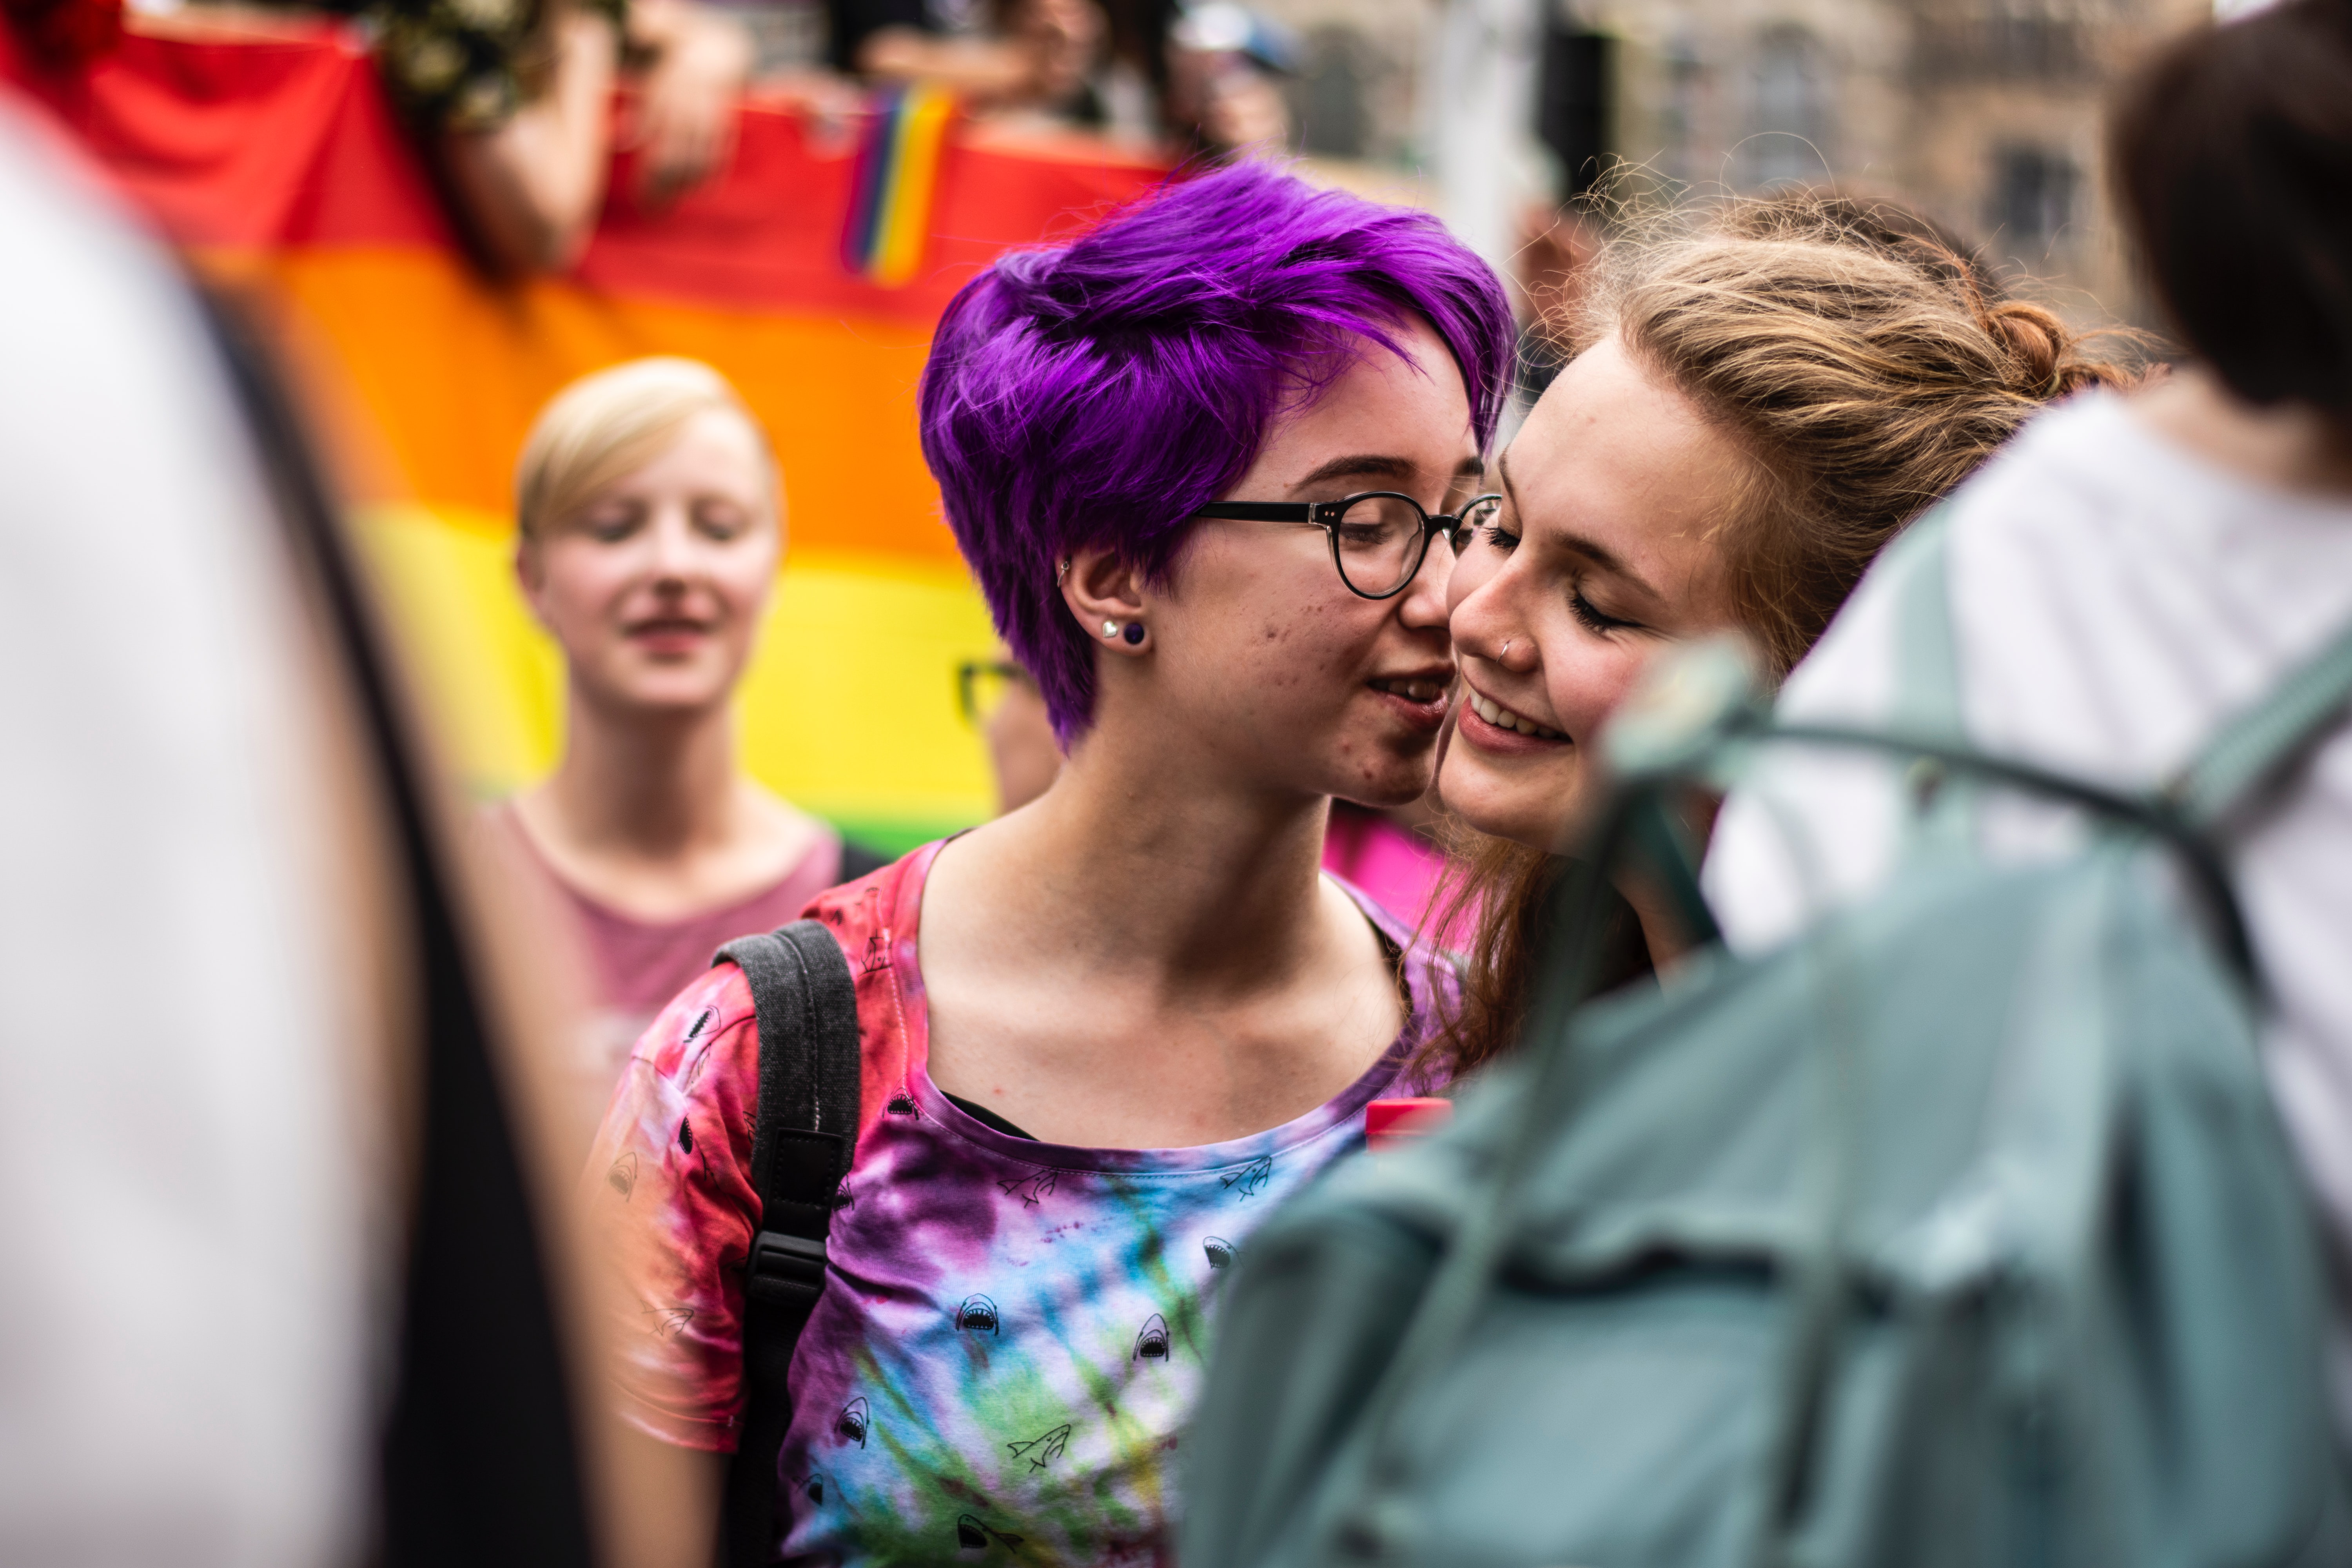 Two women, one with dyed purple hair, share an intimate moment talking during a pride parade.